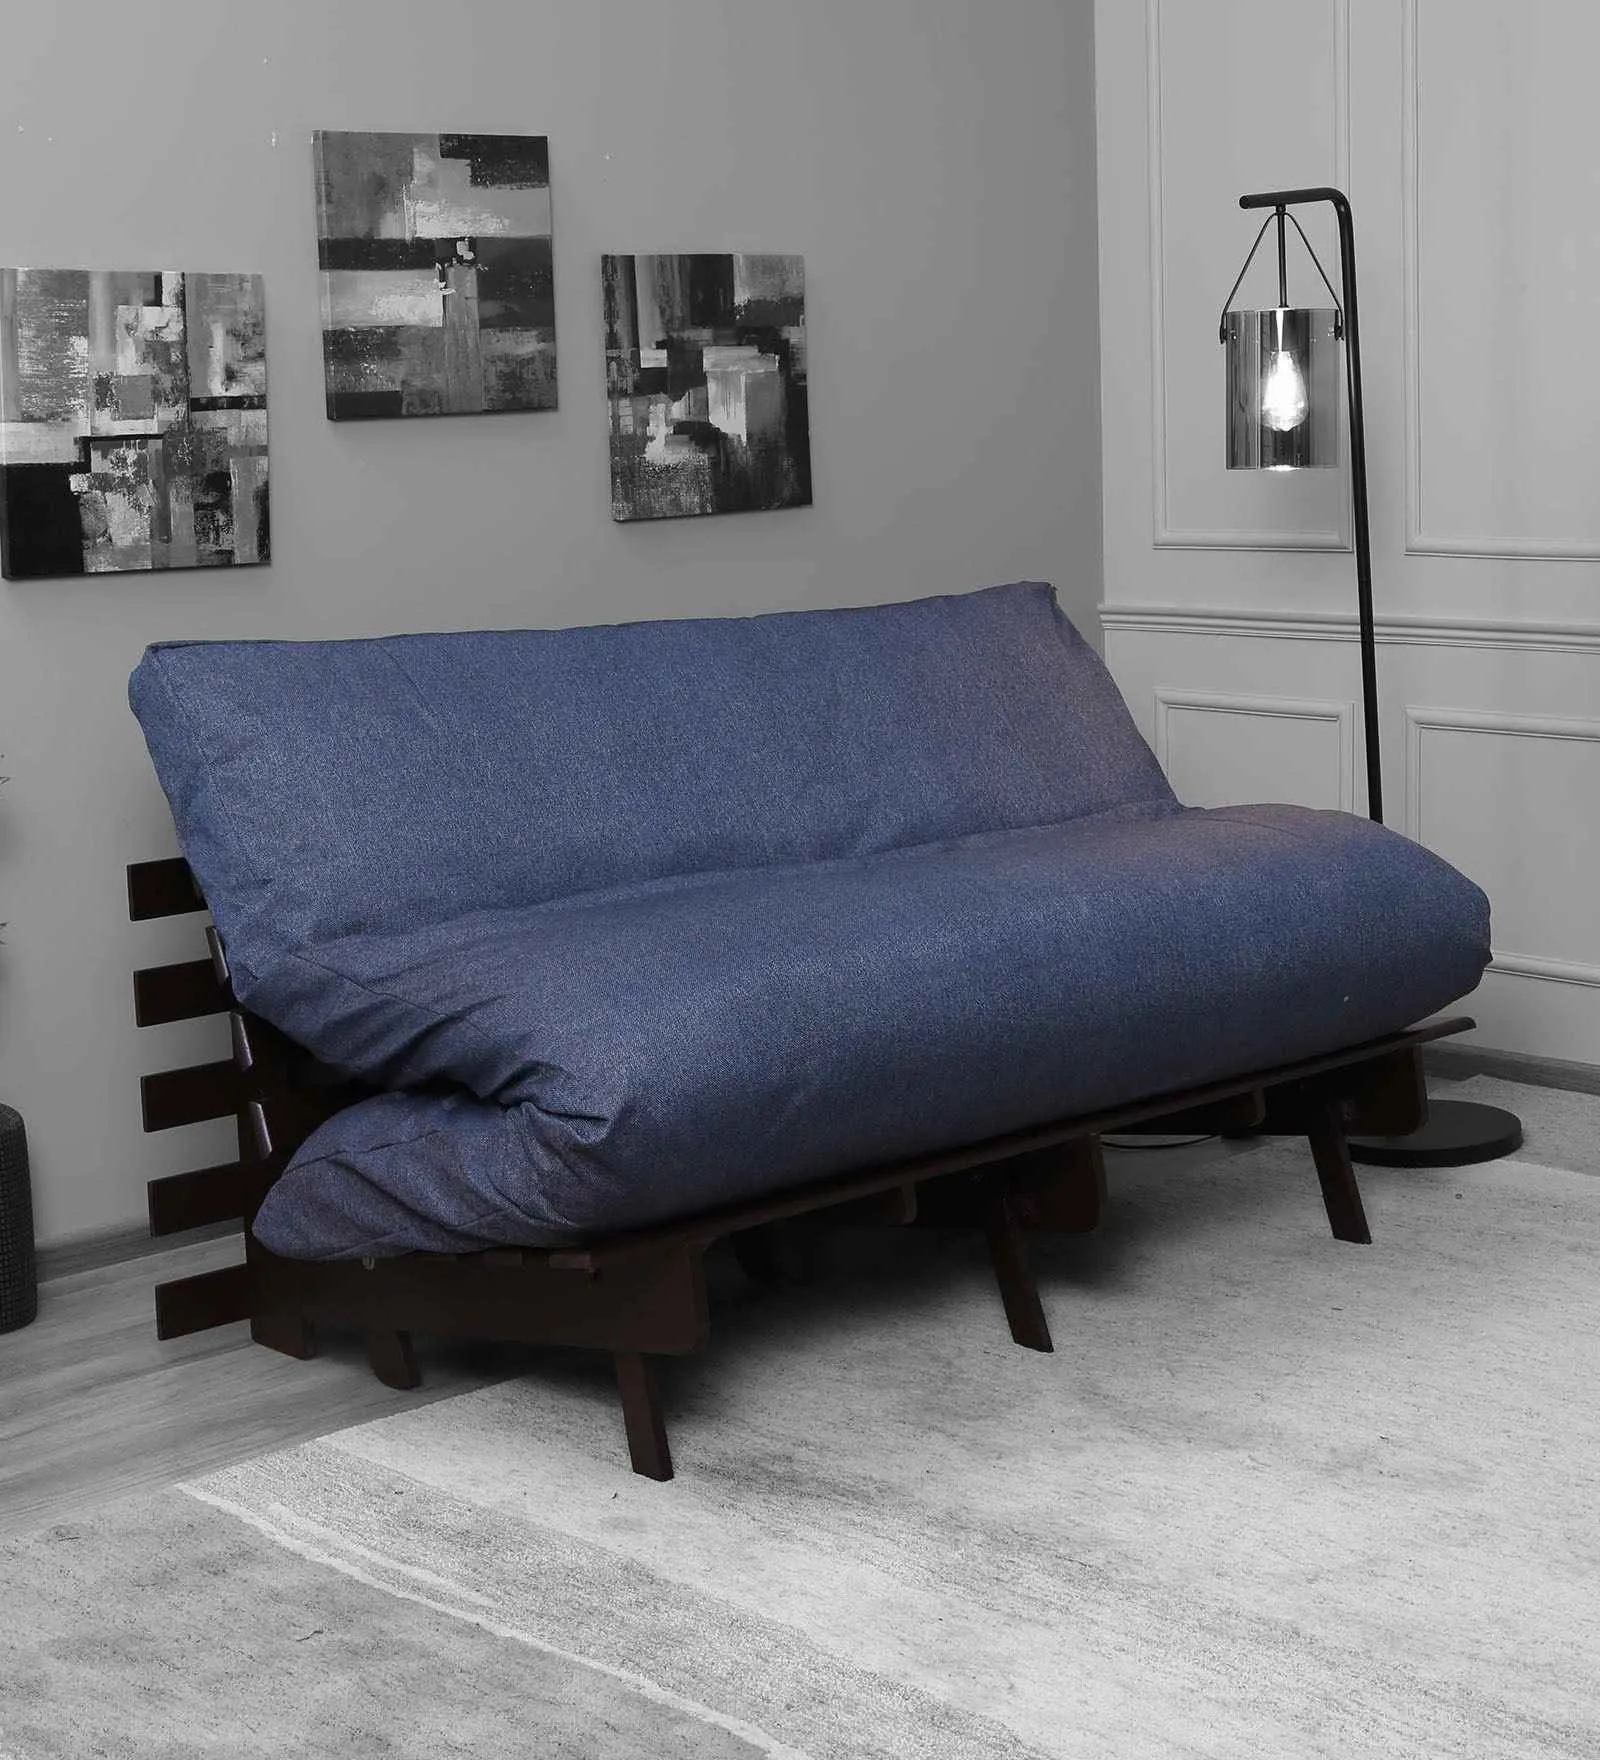 blue futon sofa in a living room with floor lamp and wall art